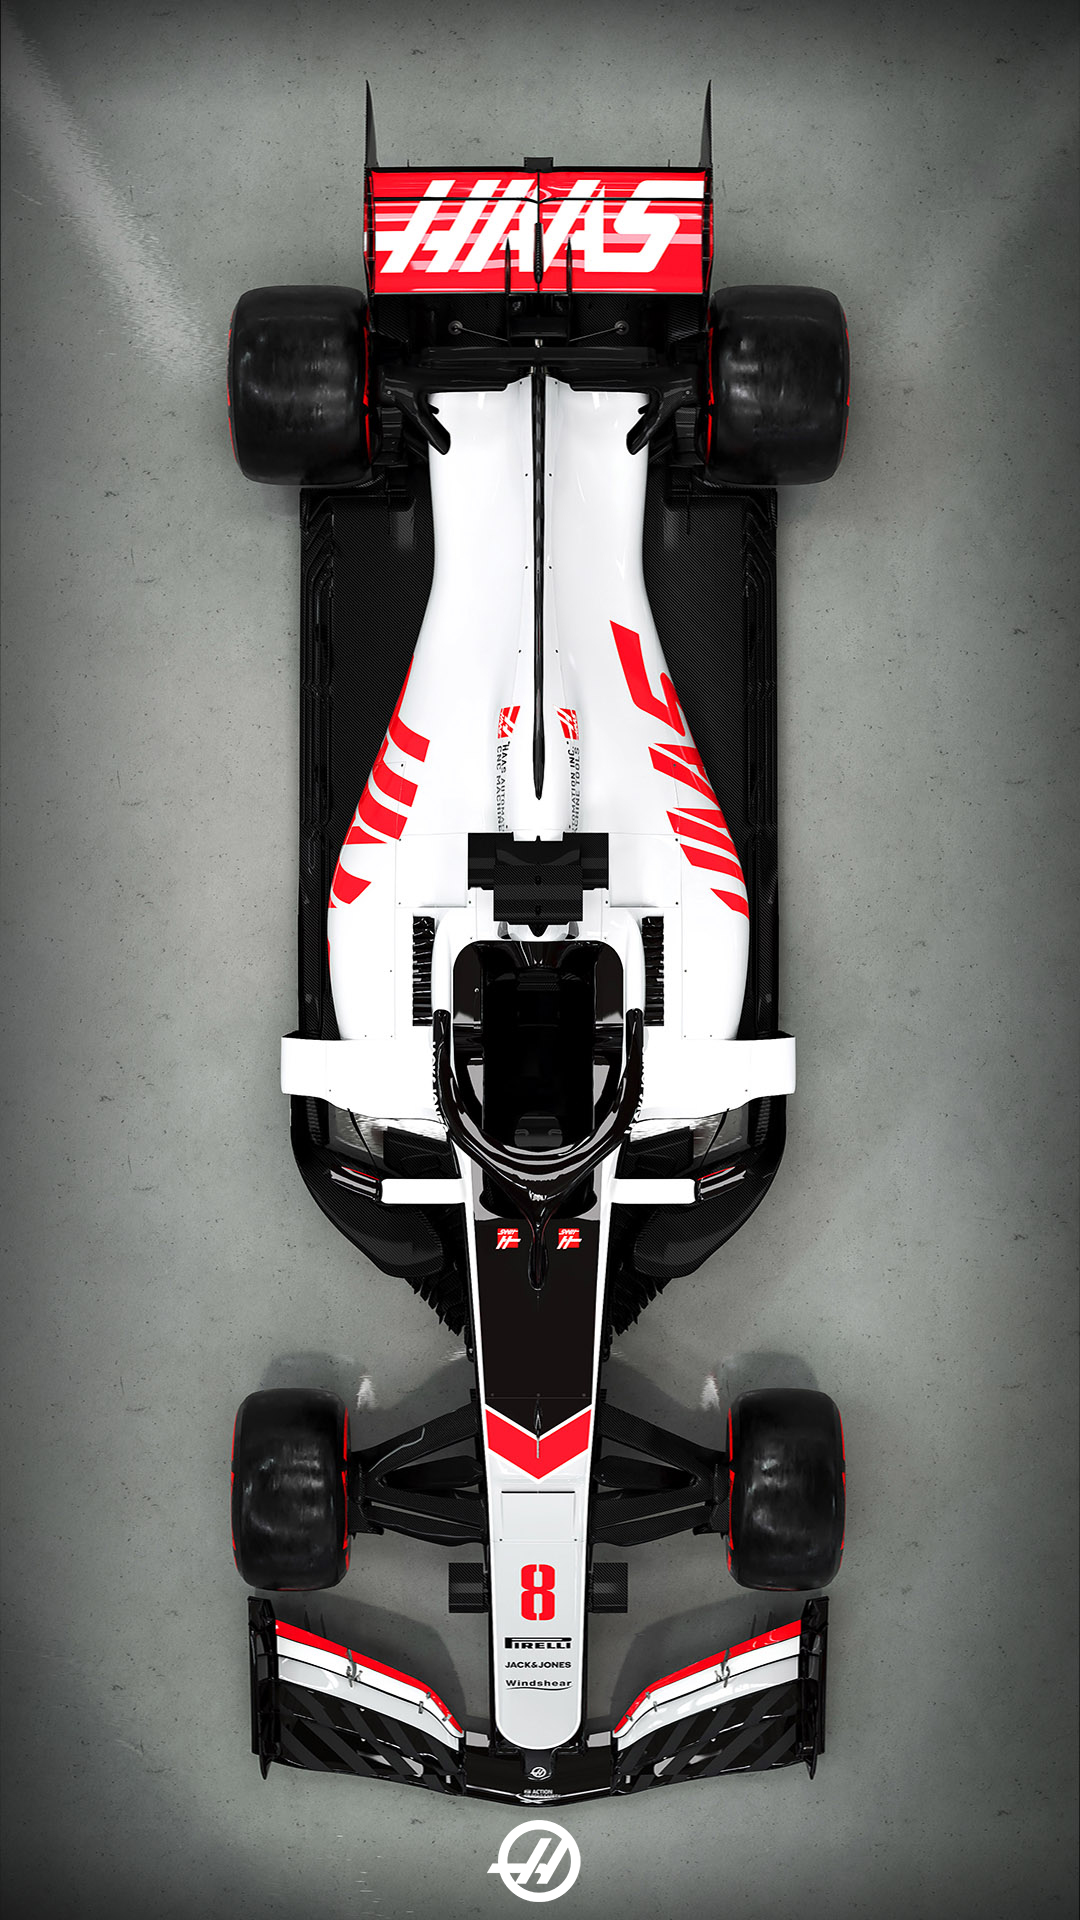 MoneyGram Haas F1 Team A Couple Of New Look Wallpaper For Your Screens